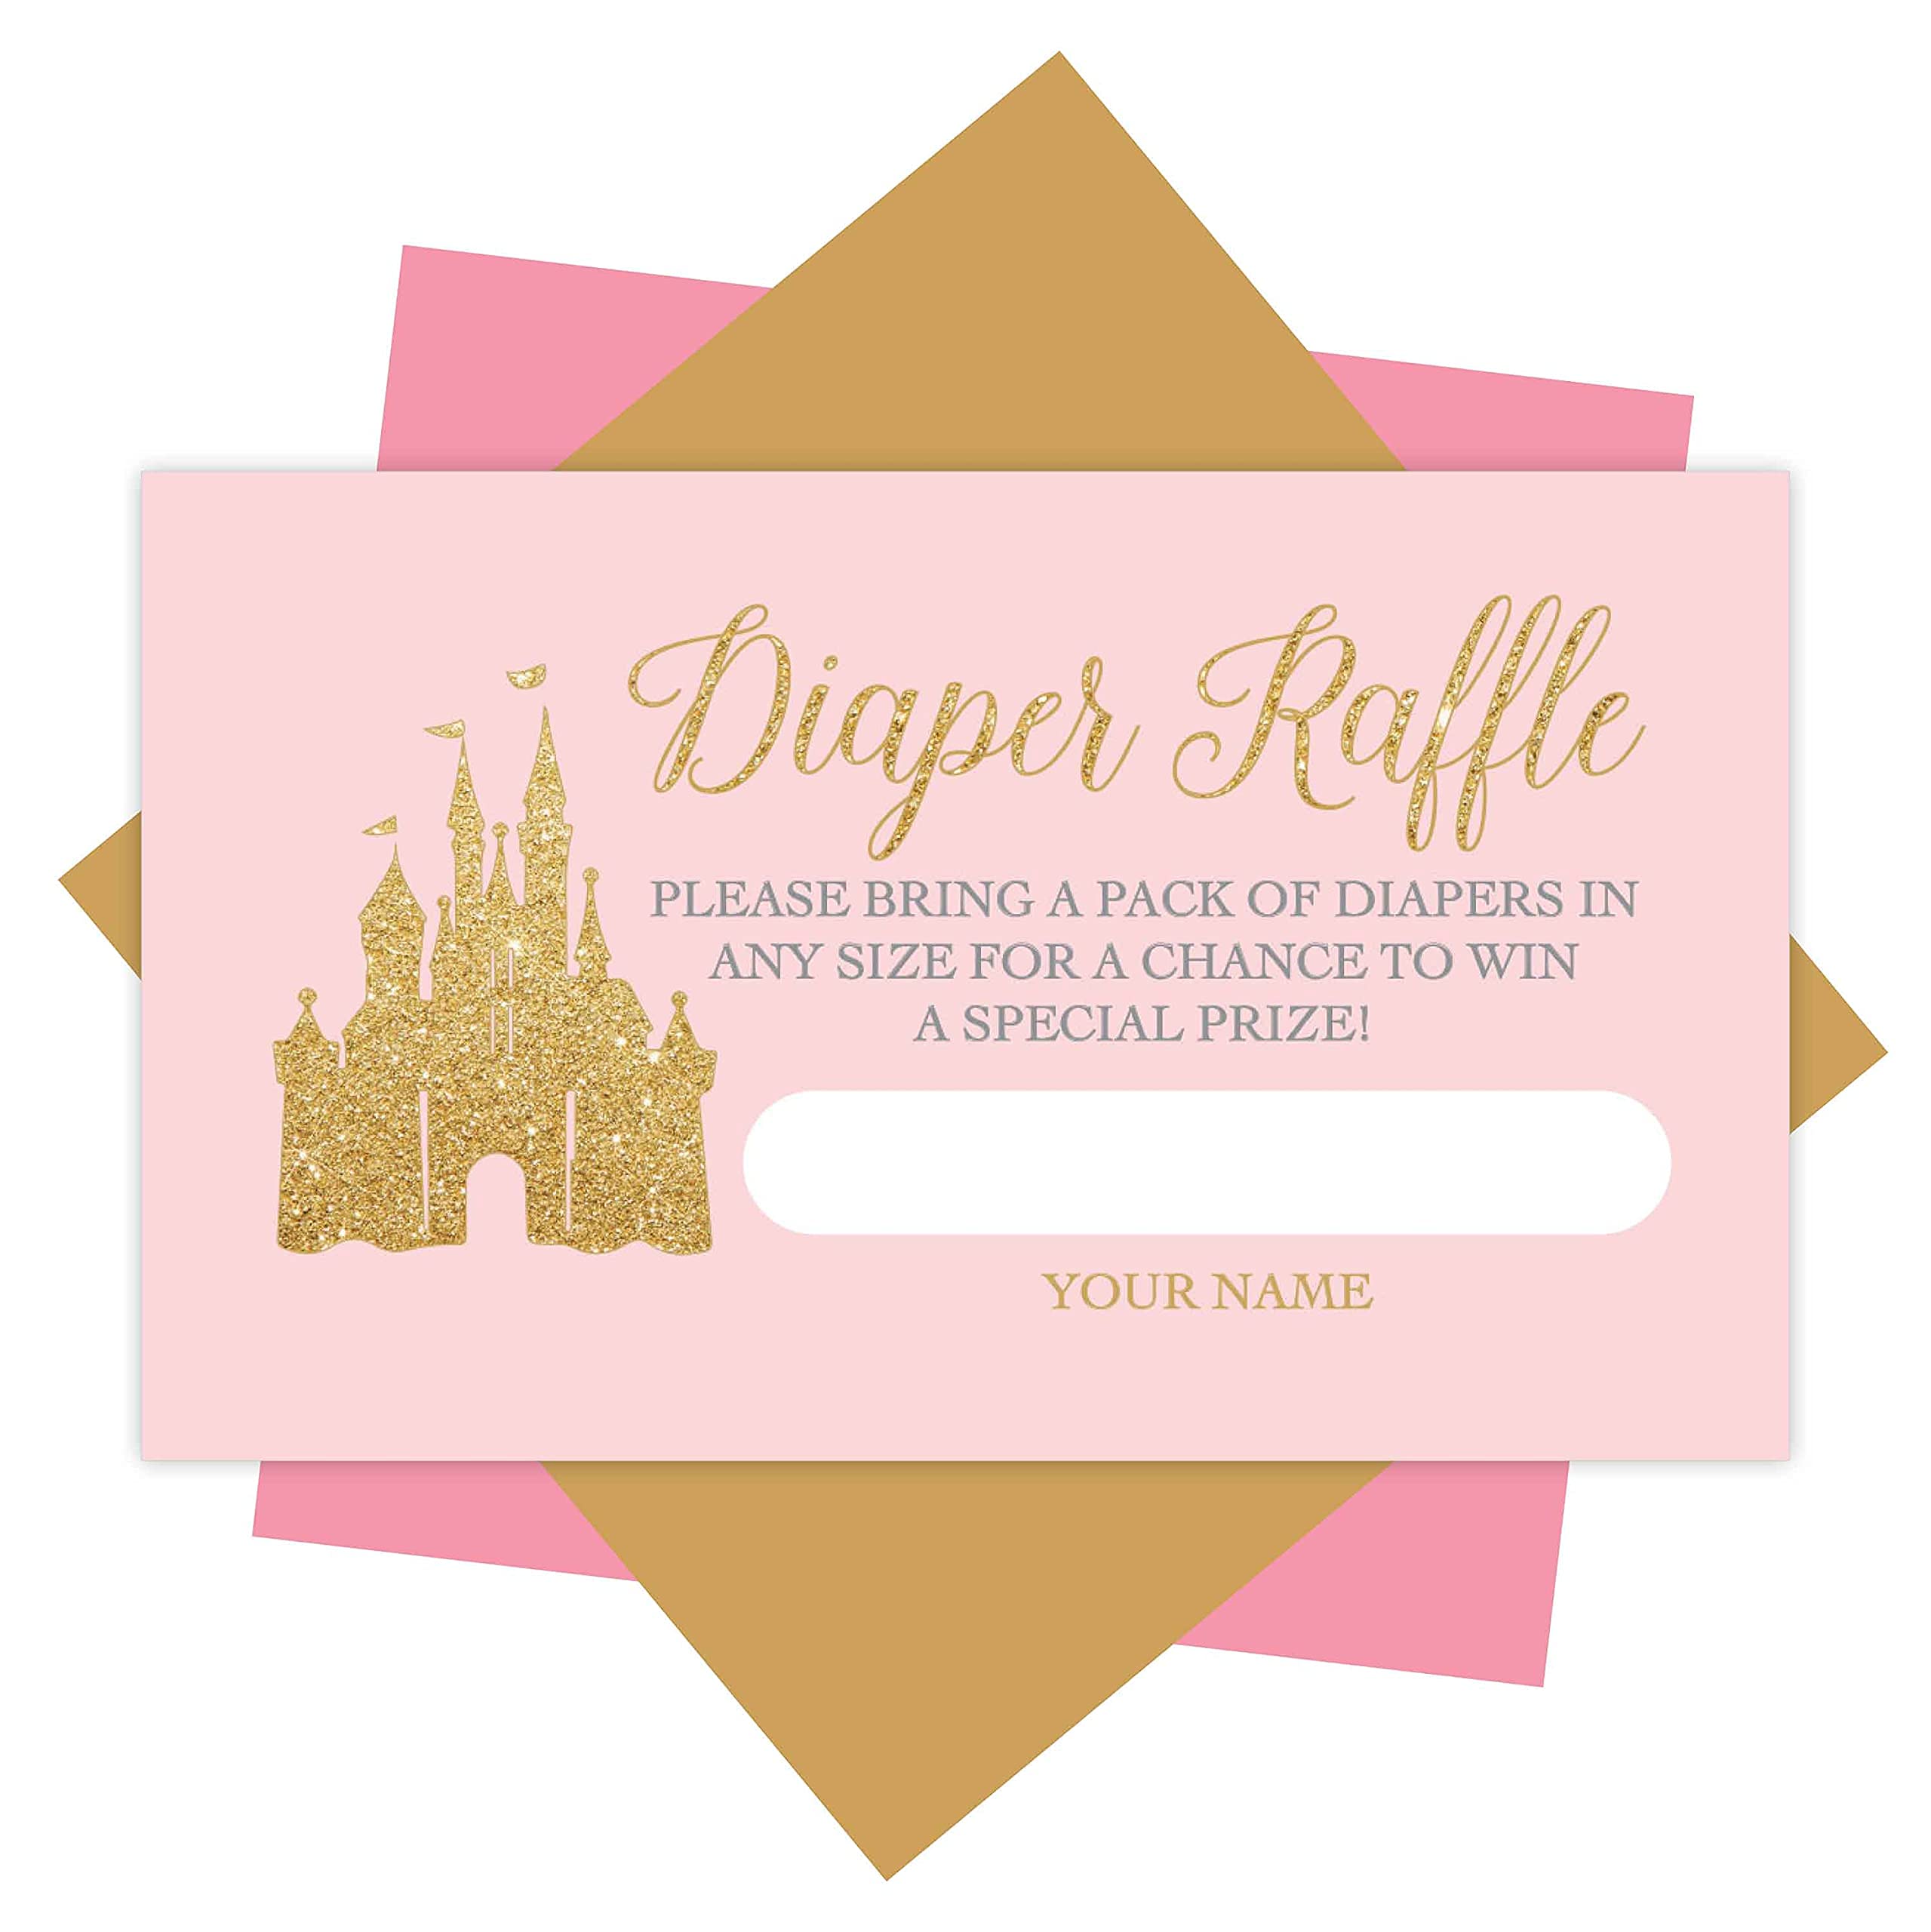 25 Little Princess Baby Shower Invitations, 25 Books For Baby Shower Request Cards, 25 Baby Shower Diaper Raffle Tickets For Baby Shower Girl, Cute Pink & Gold Write in Diaper Raffle Cards